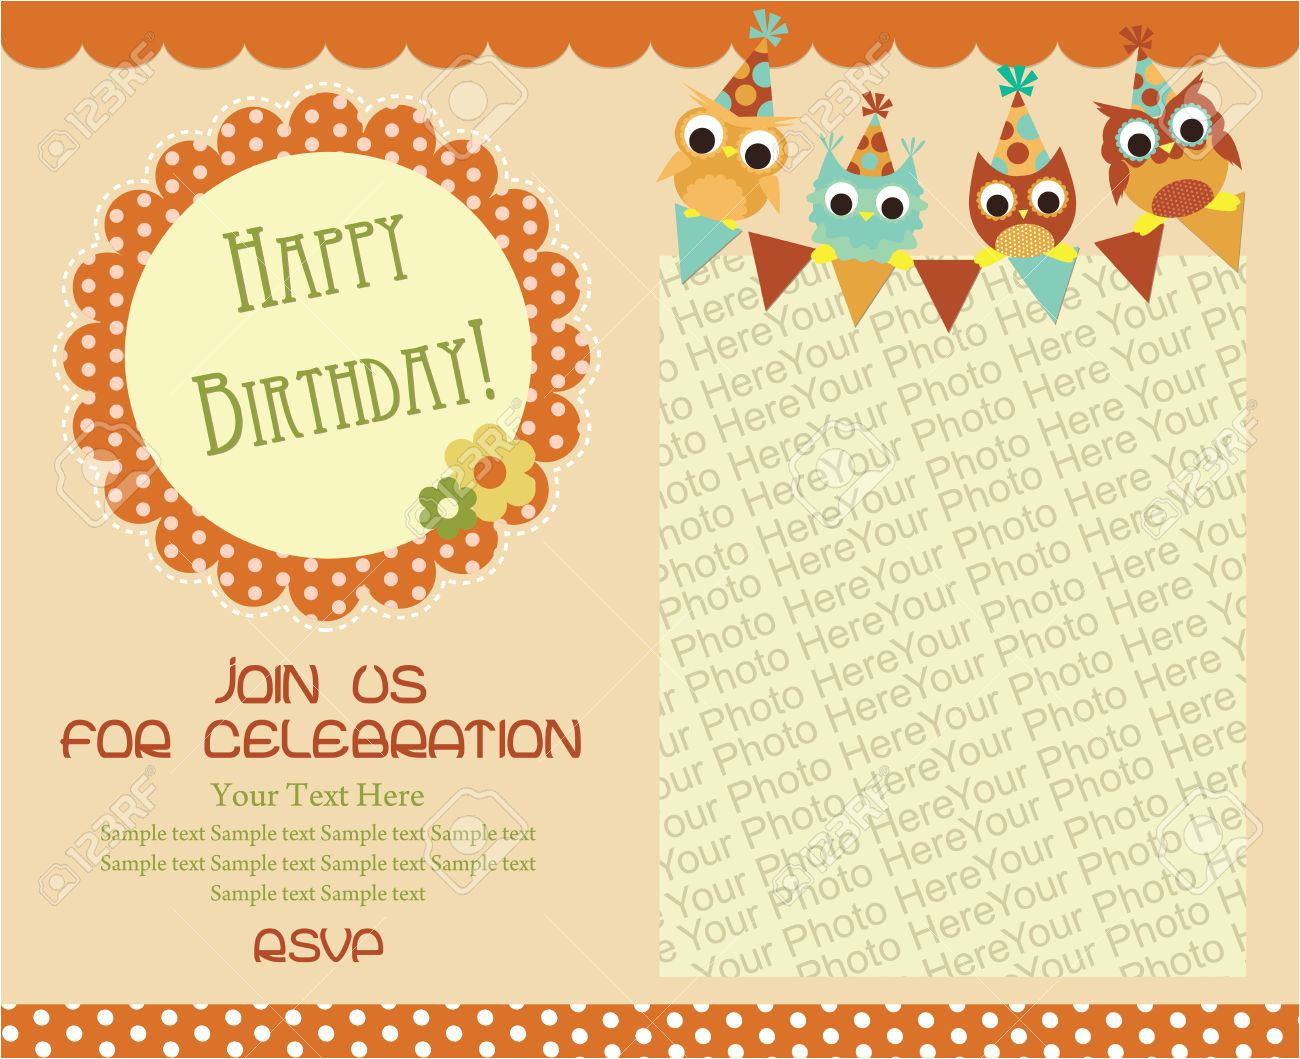 baby shower invitation templates you can edit